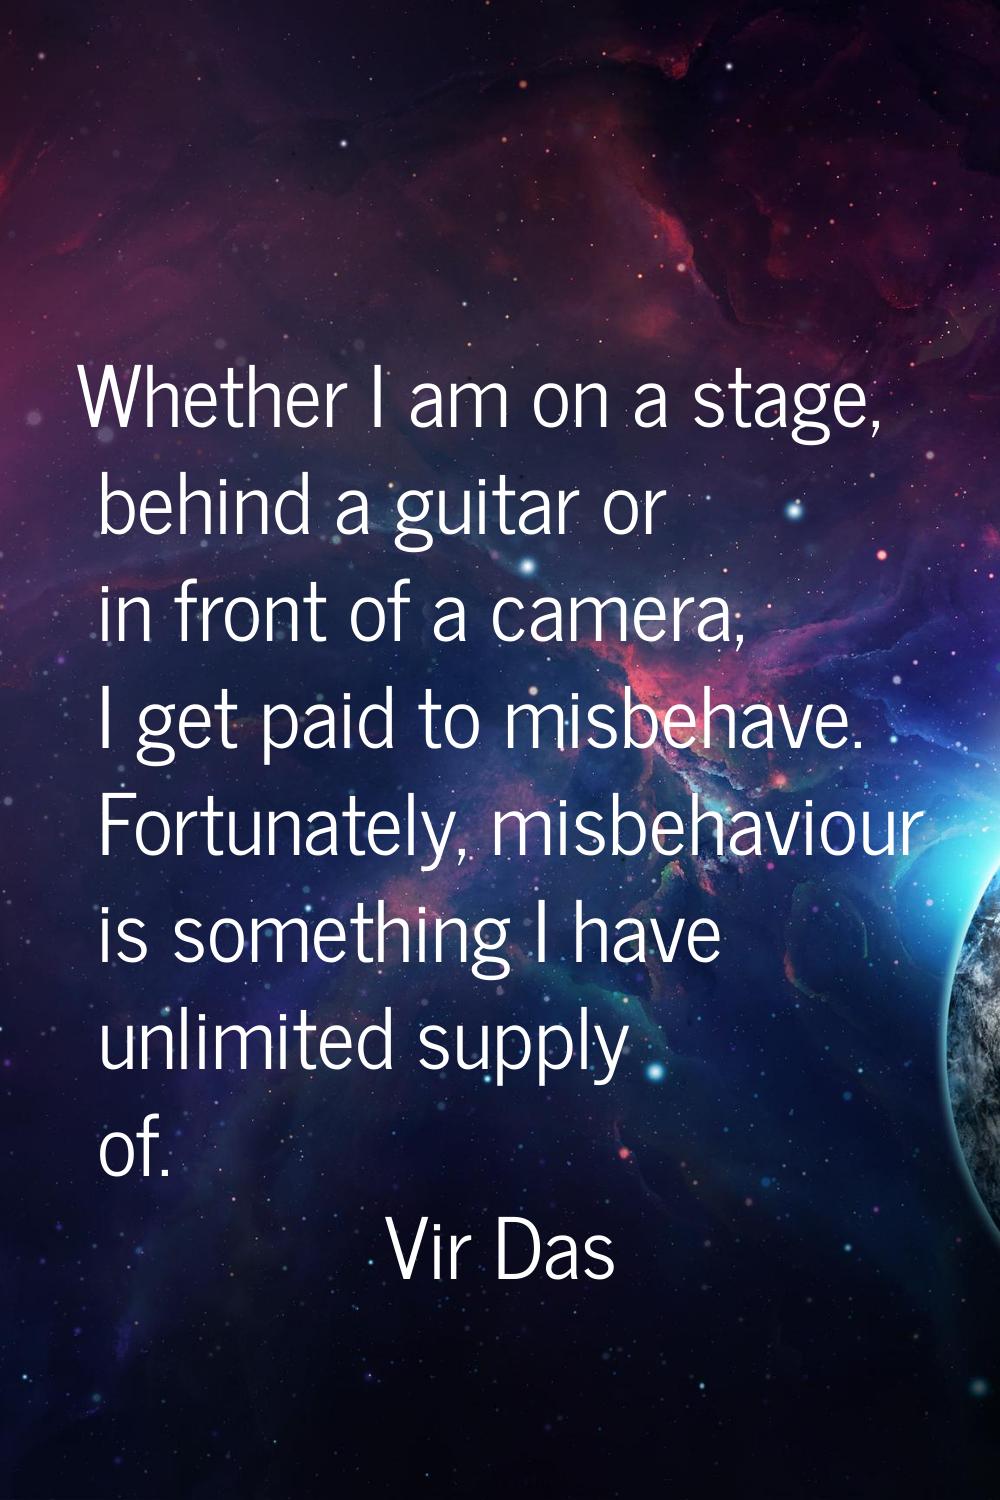 Whether I am on a stage, behind a guitar or in front of a camera, I get paid to misbehave. Fortunat